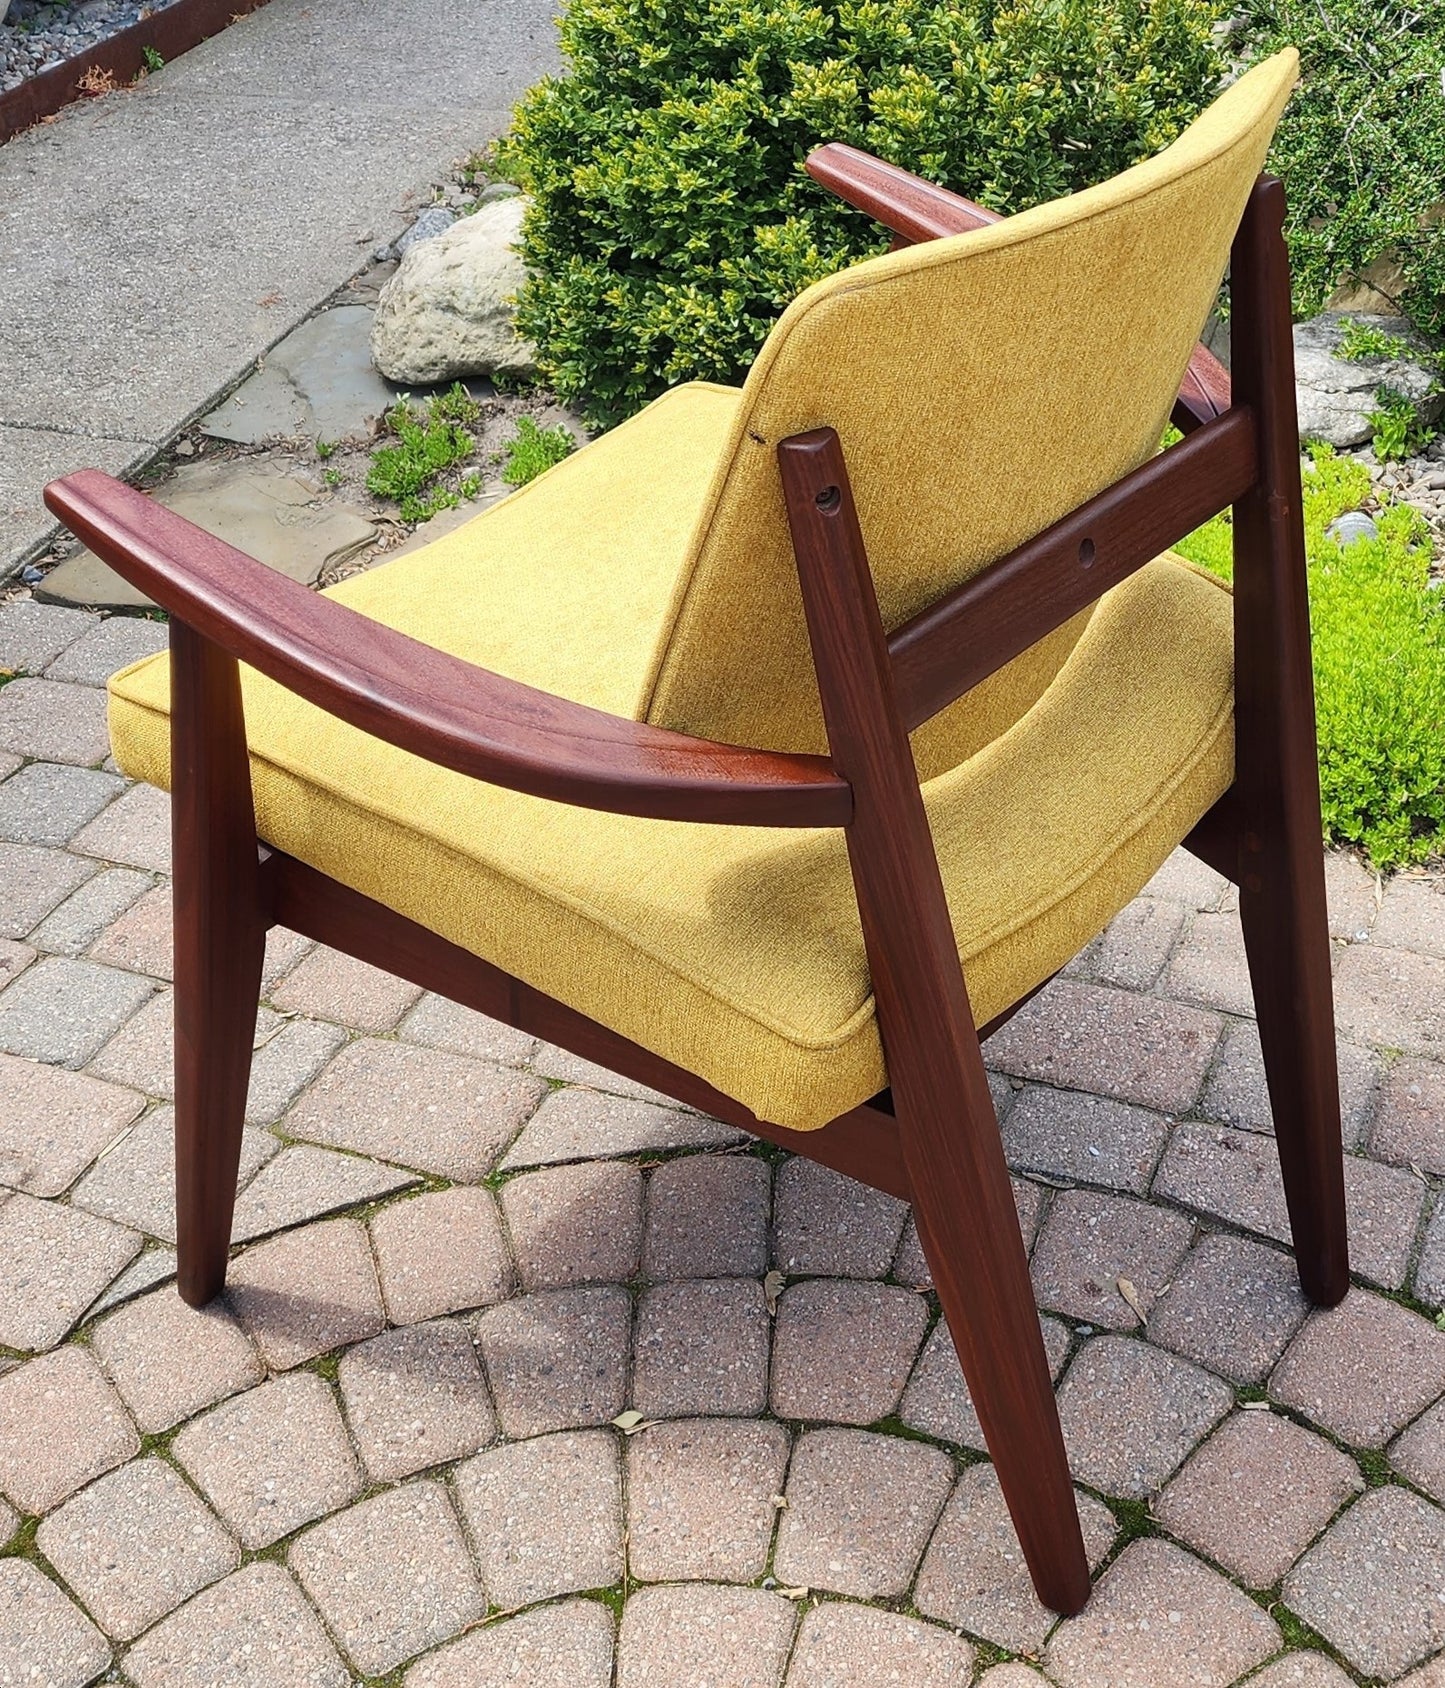 REFINISHED REUPHOLSTERED Mid Century Modern Afromosia Arm Chair by Jan Kuypers